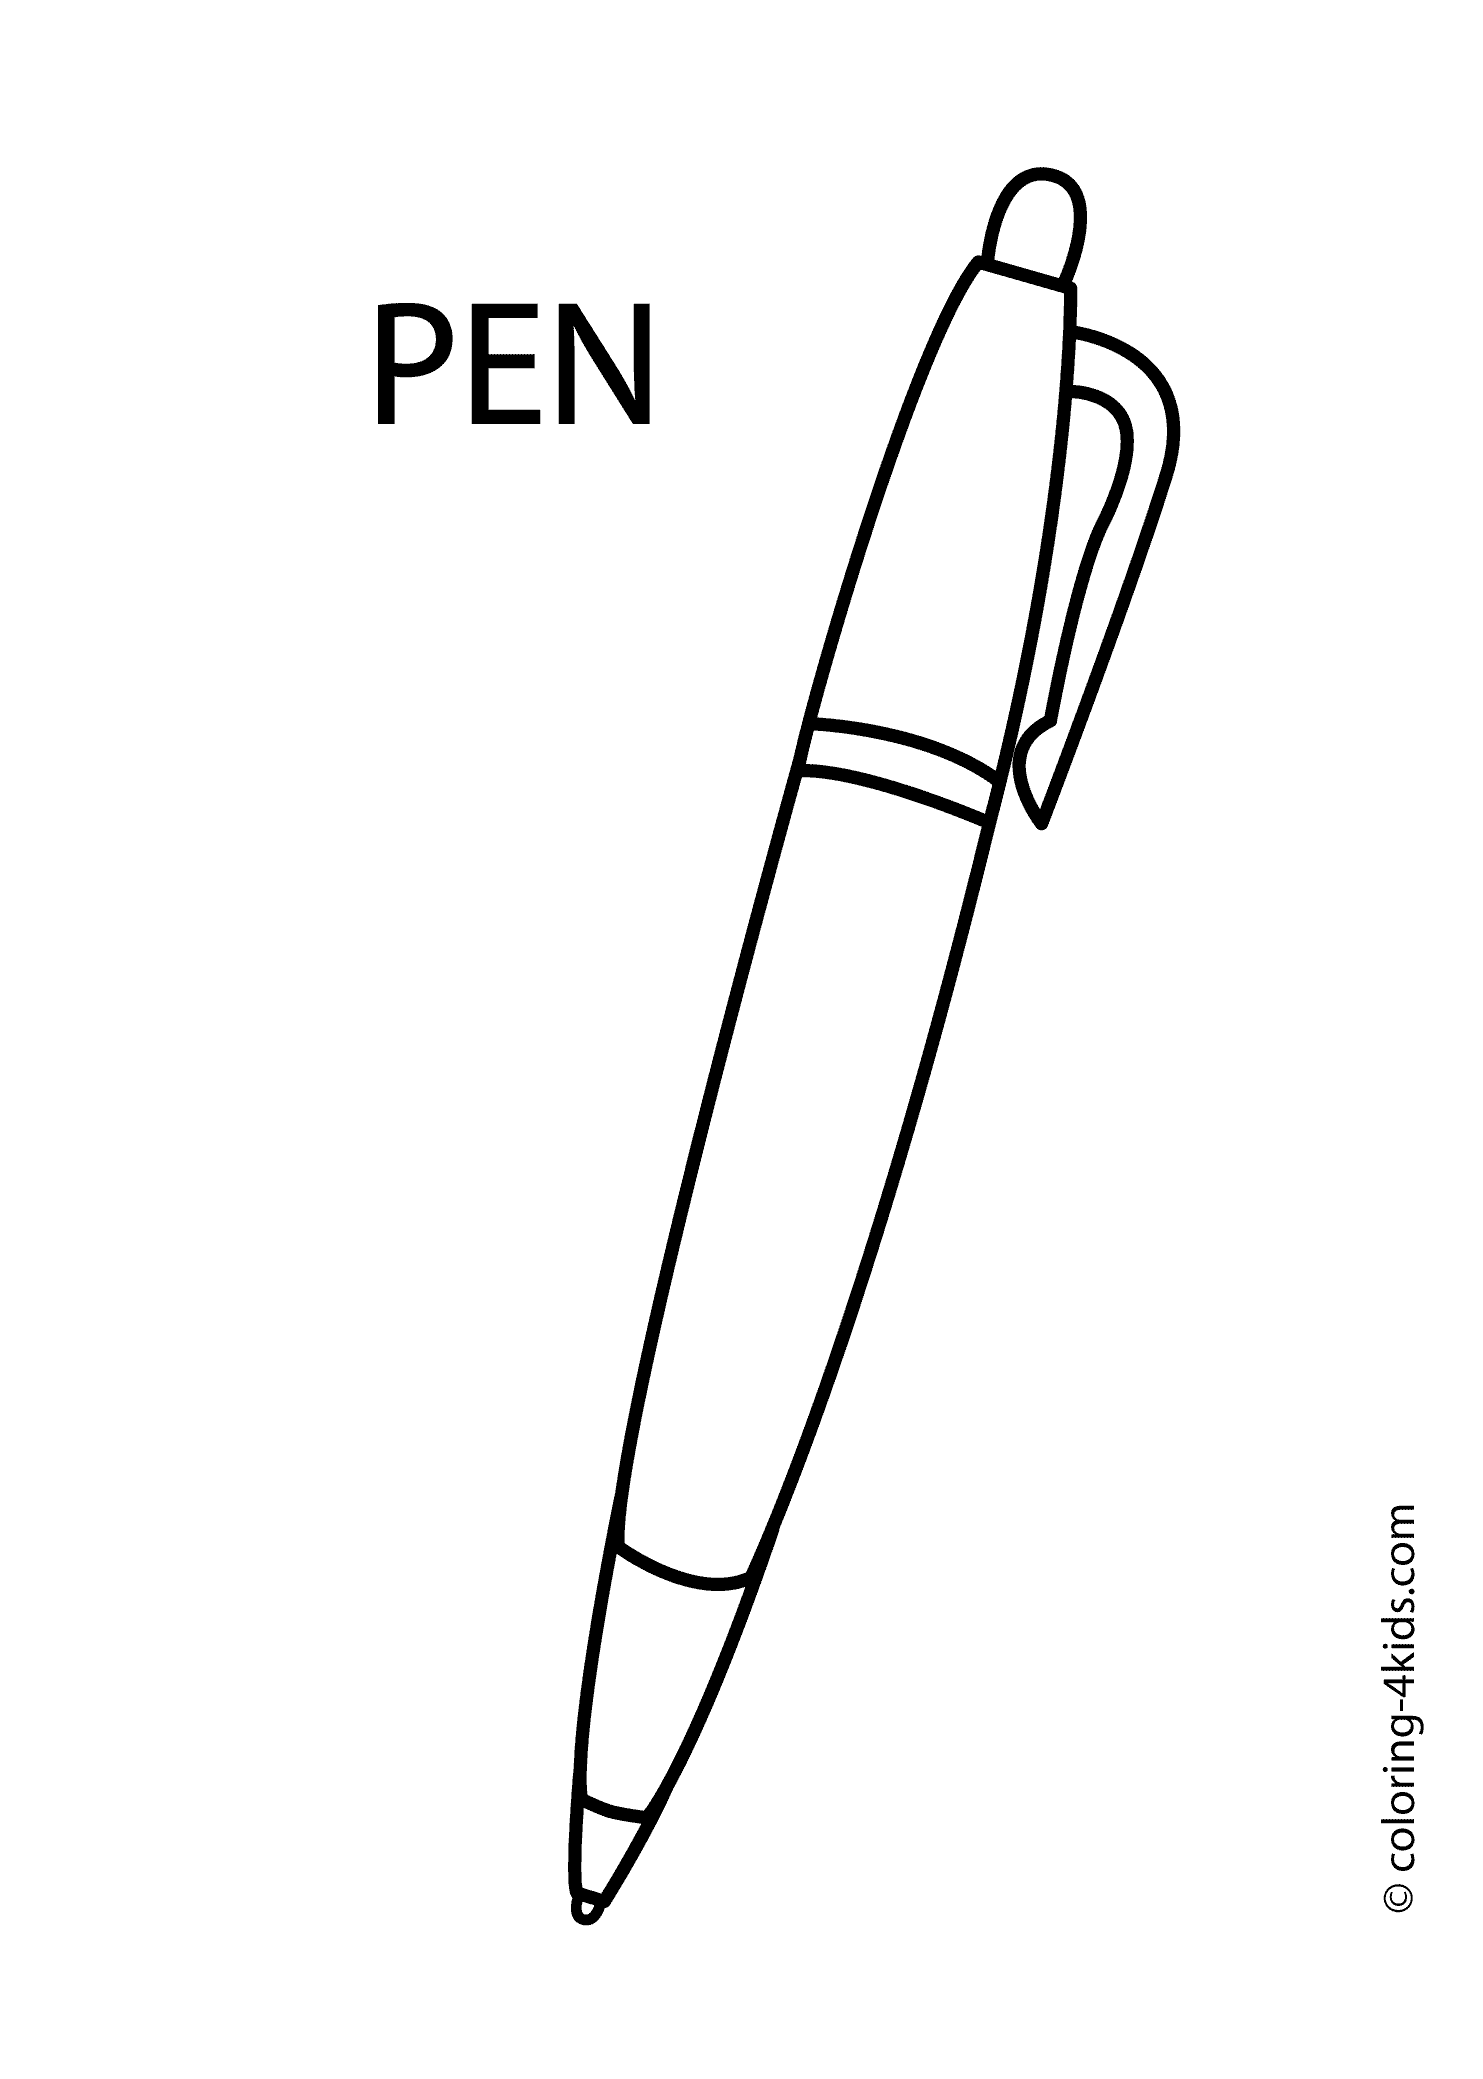 School pen coloring page classes coloring page for kids printable free school coloring pages coloring pages for kids coloring pages